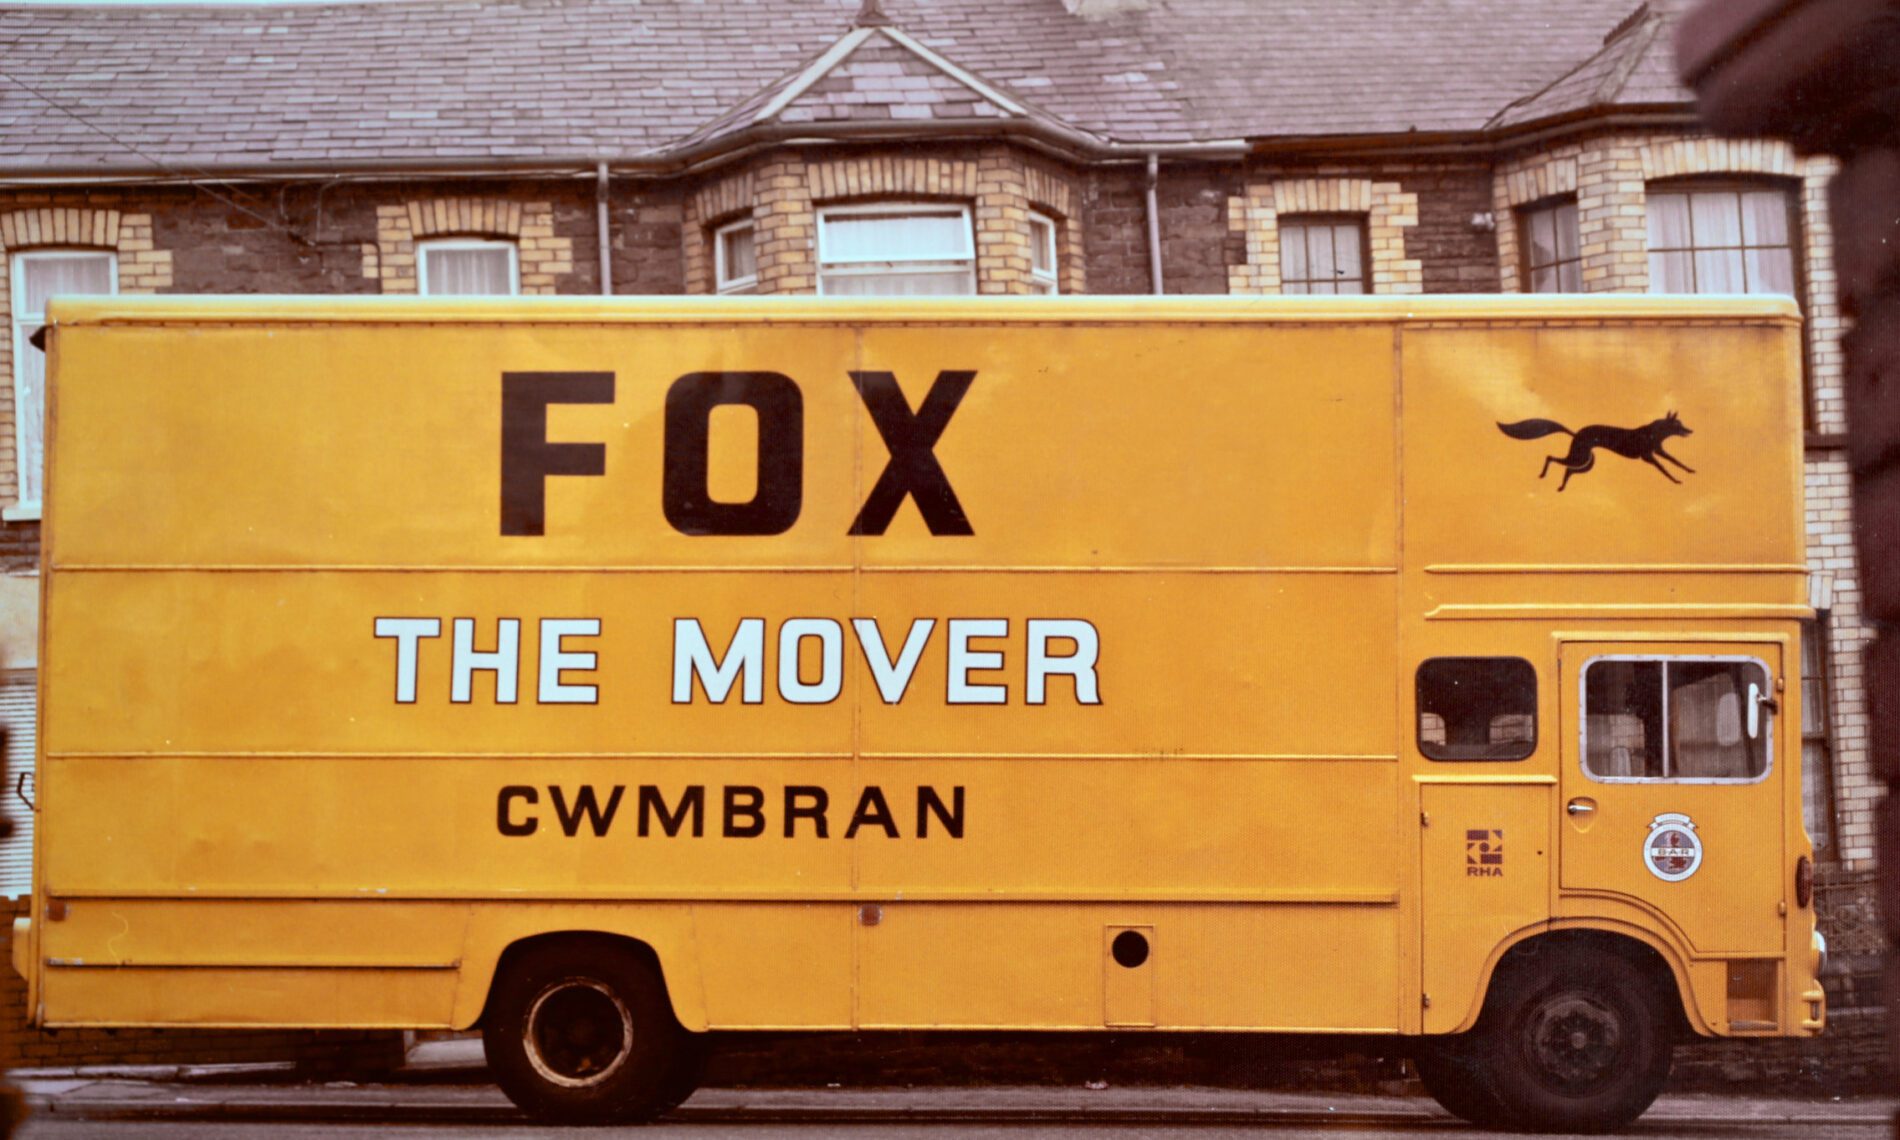 the first fox the mover van from 1974